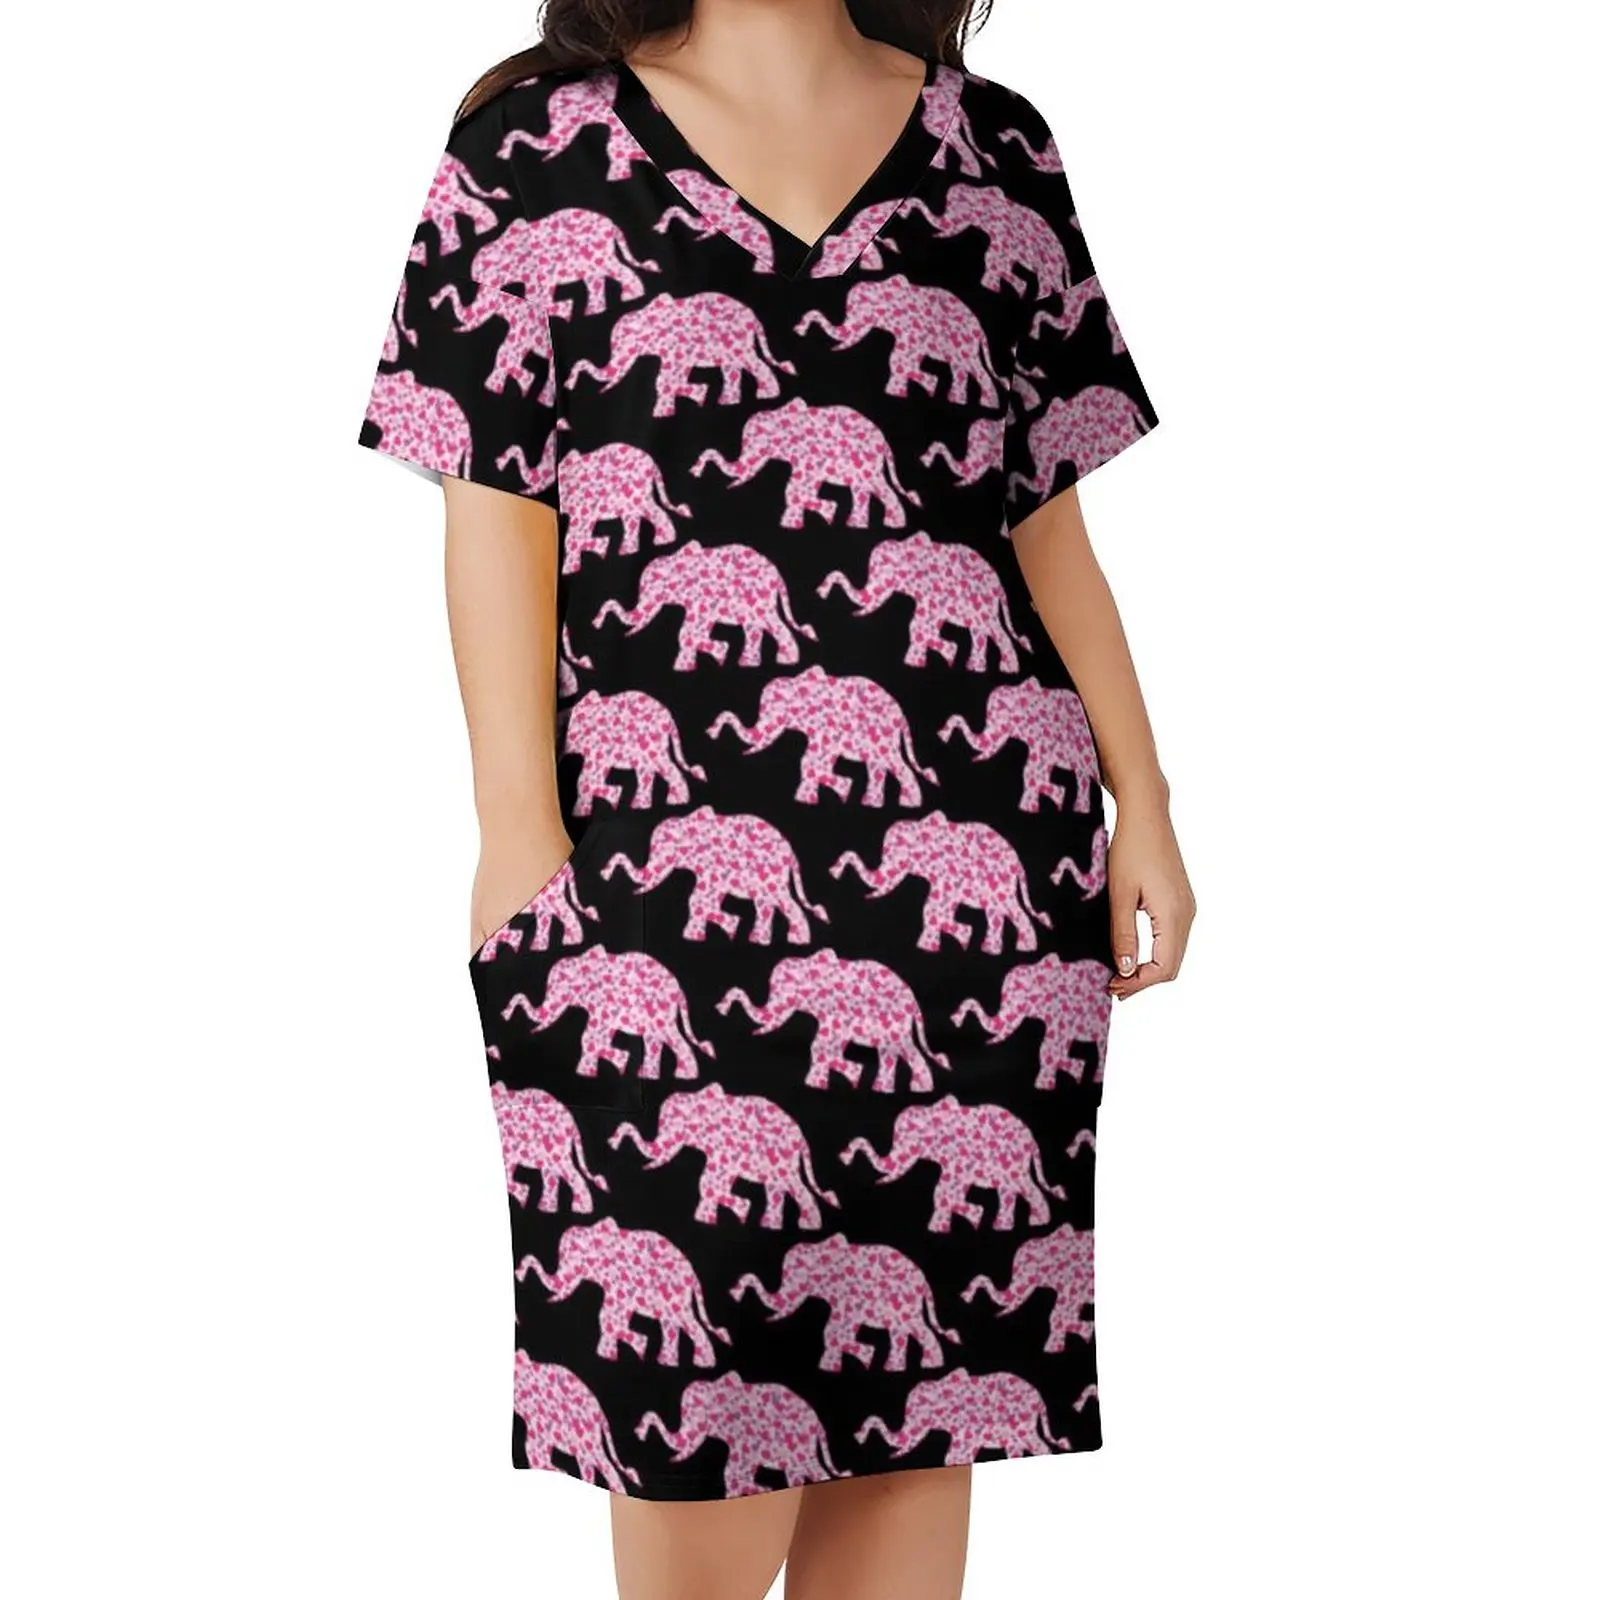 Elephant Print Dress V Neck Pink Hearts of Love Korean Fashion Dresses Spring Sexy Casual Dress Woman Graphic Plus Size Clothes